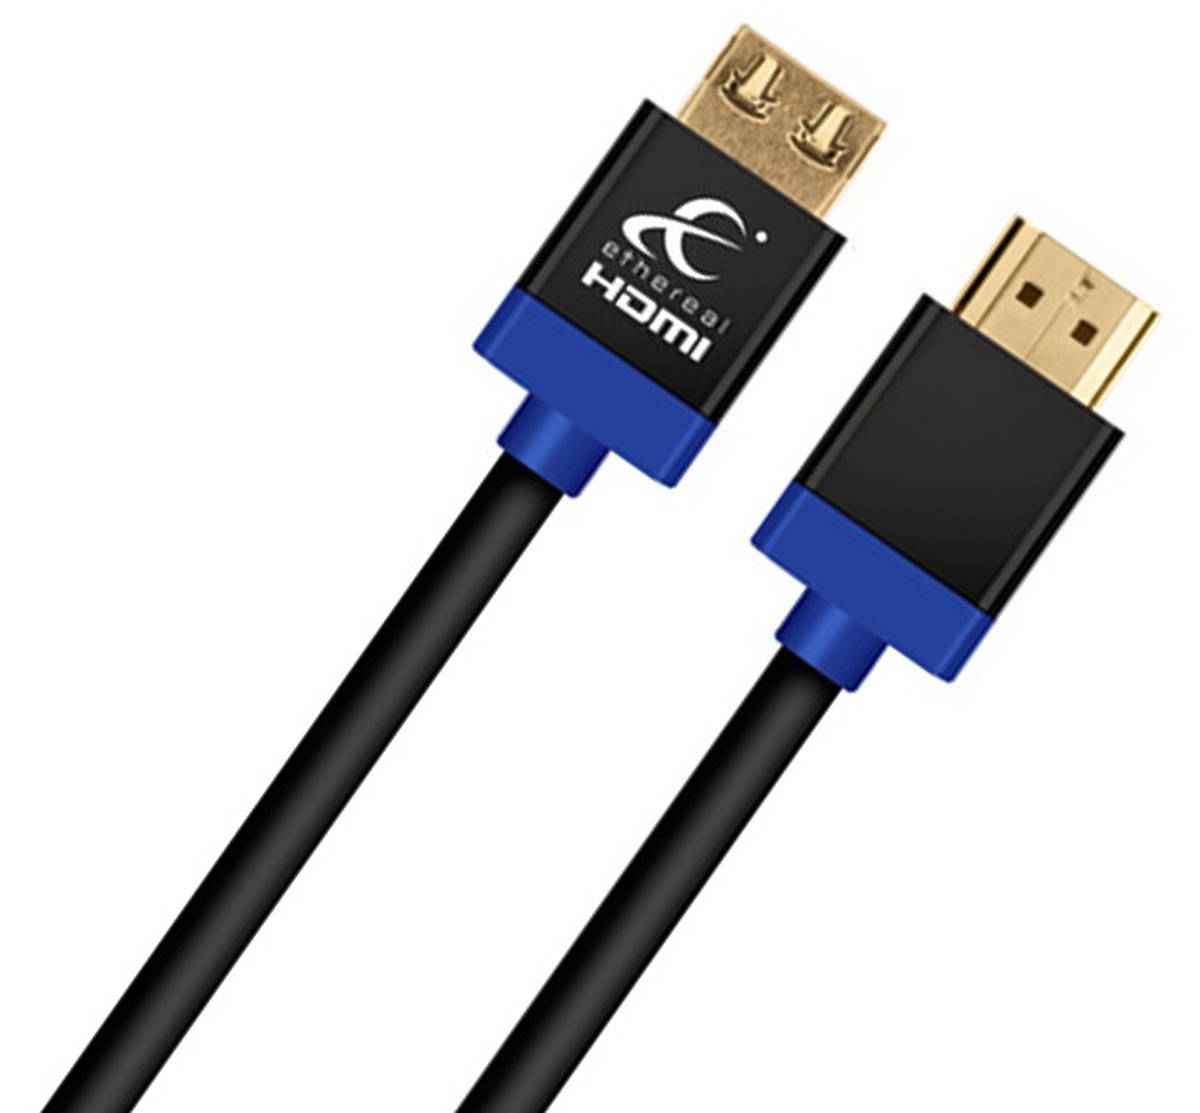 MHY-LHDMER15 15.00m Metra Ethereal MHY HDMI cable product image. Click to enlarge.